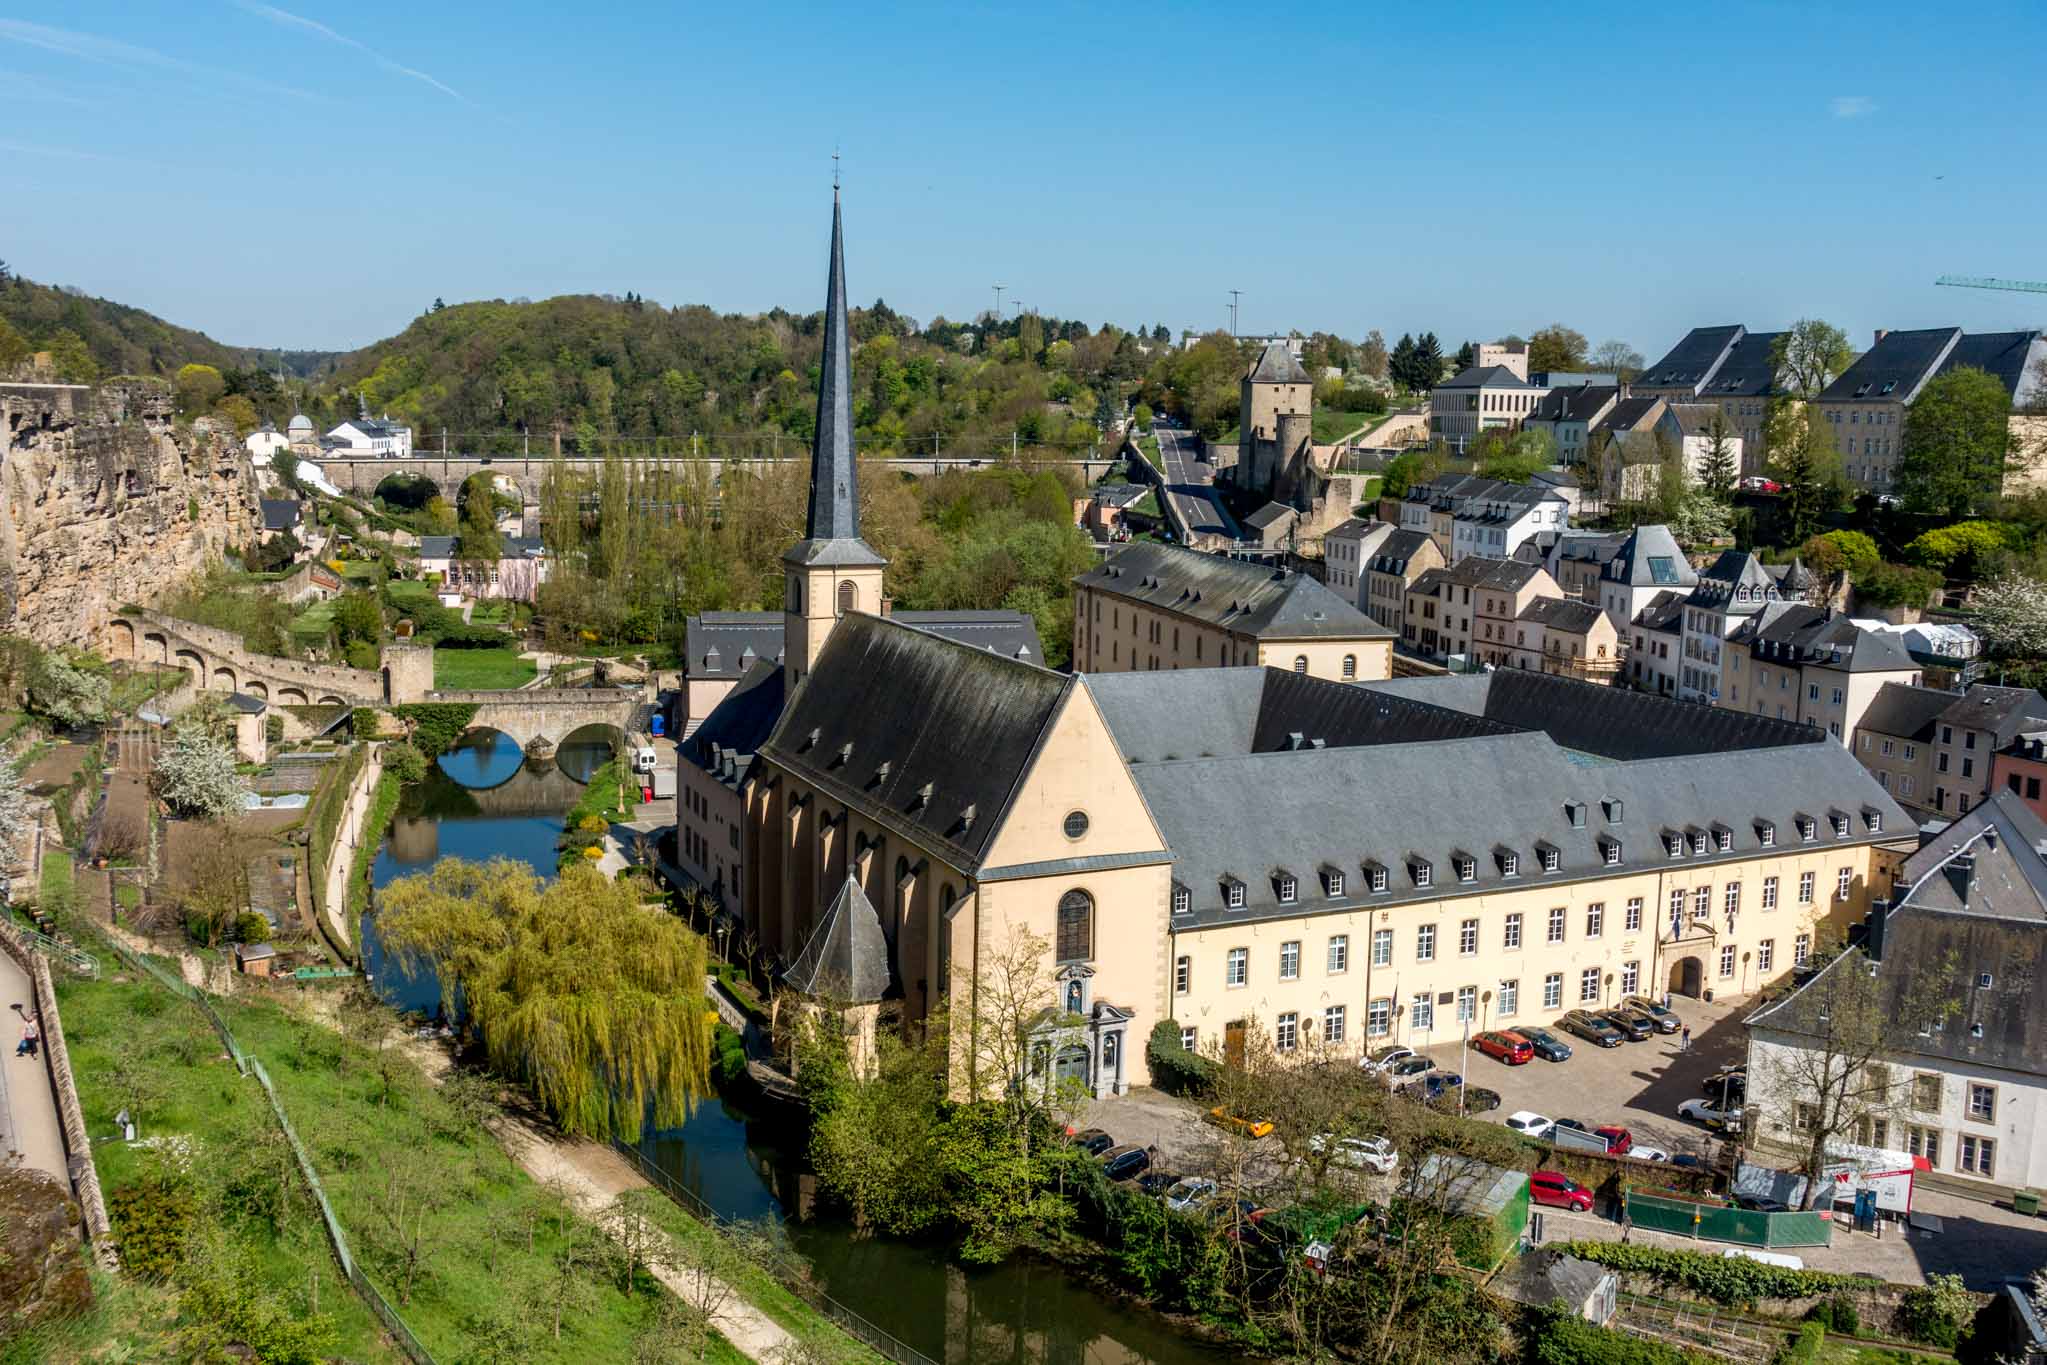 View of church and buildings in river valley in Luxembourg City